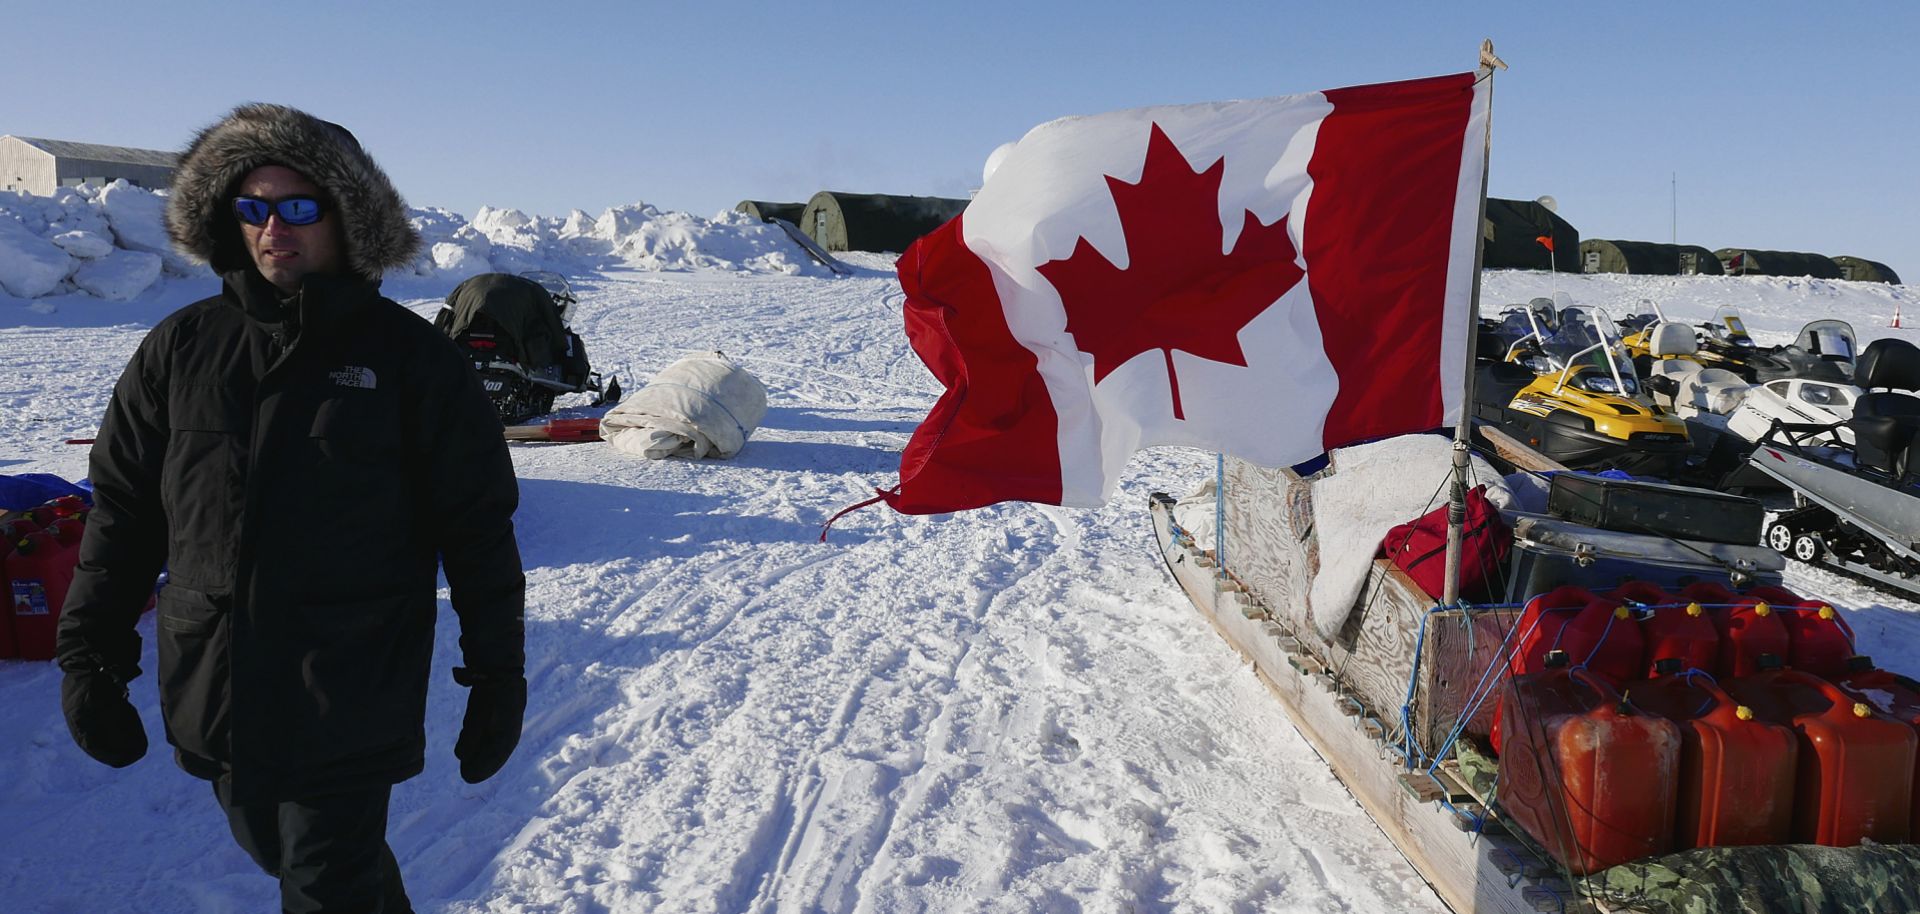 A project manager for the Arctic Research Foundation on April 9, 2015, walks past snowmobiles used by Canadian troops deployed to the territory of Nunavut to demonstrate Canadian sovereignty in the Arctic.